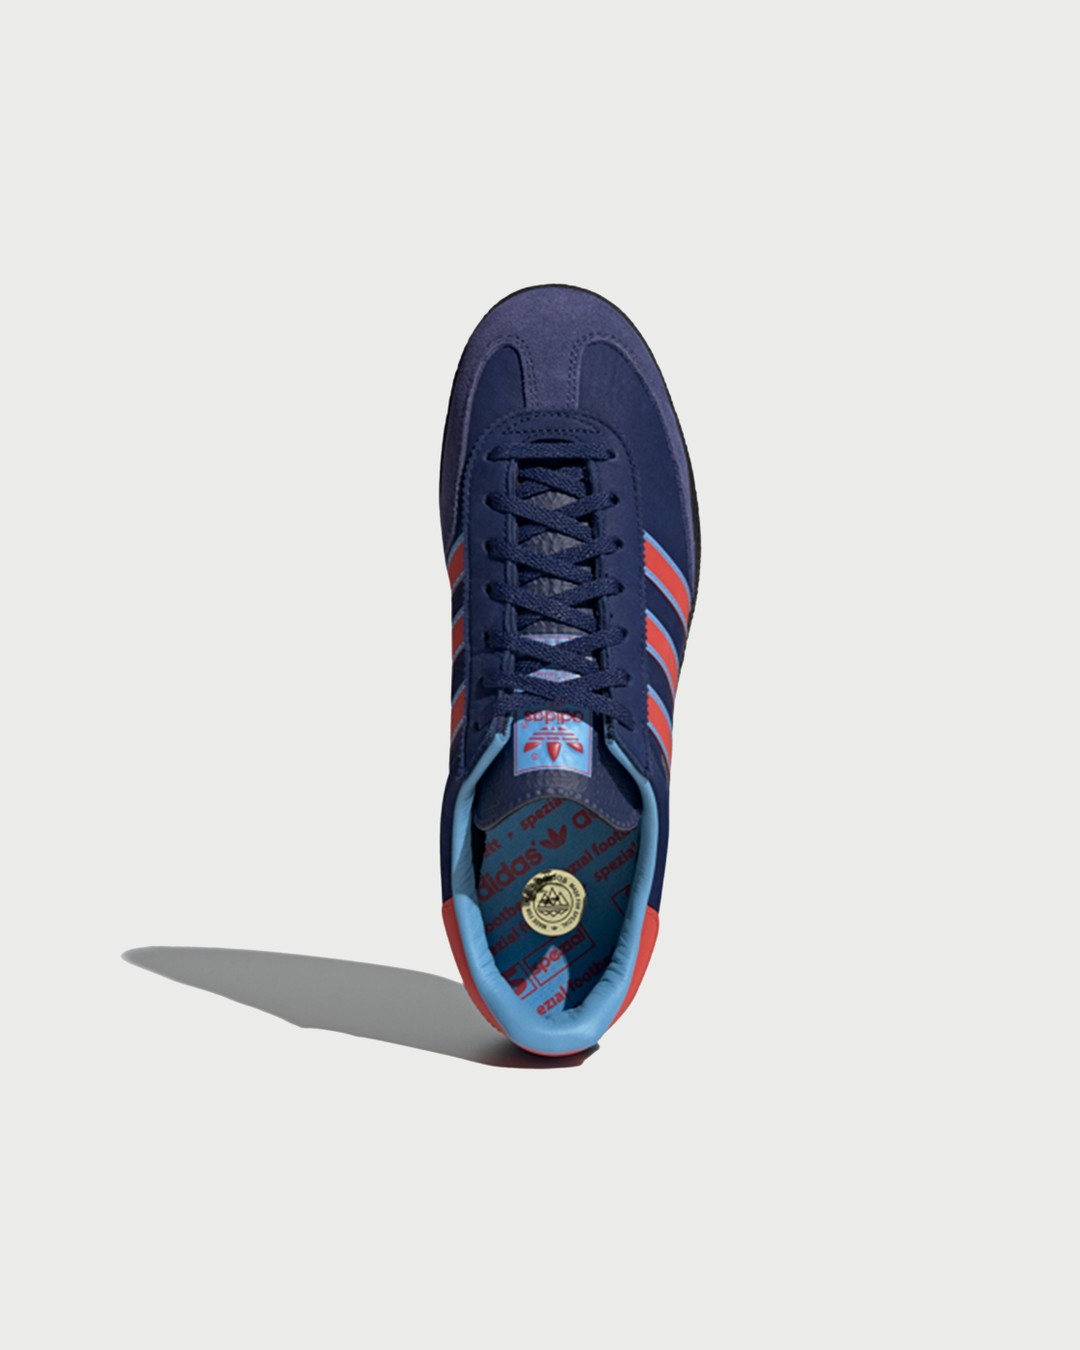 Adidas – Spezial Manchester 89 Trainer Navy - Sneakers - Blue - Image 5